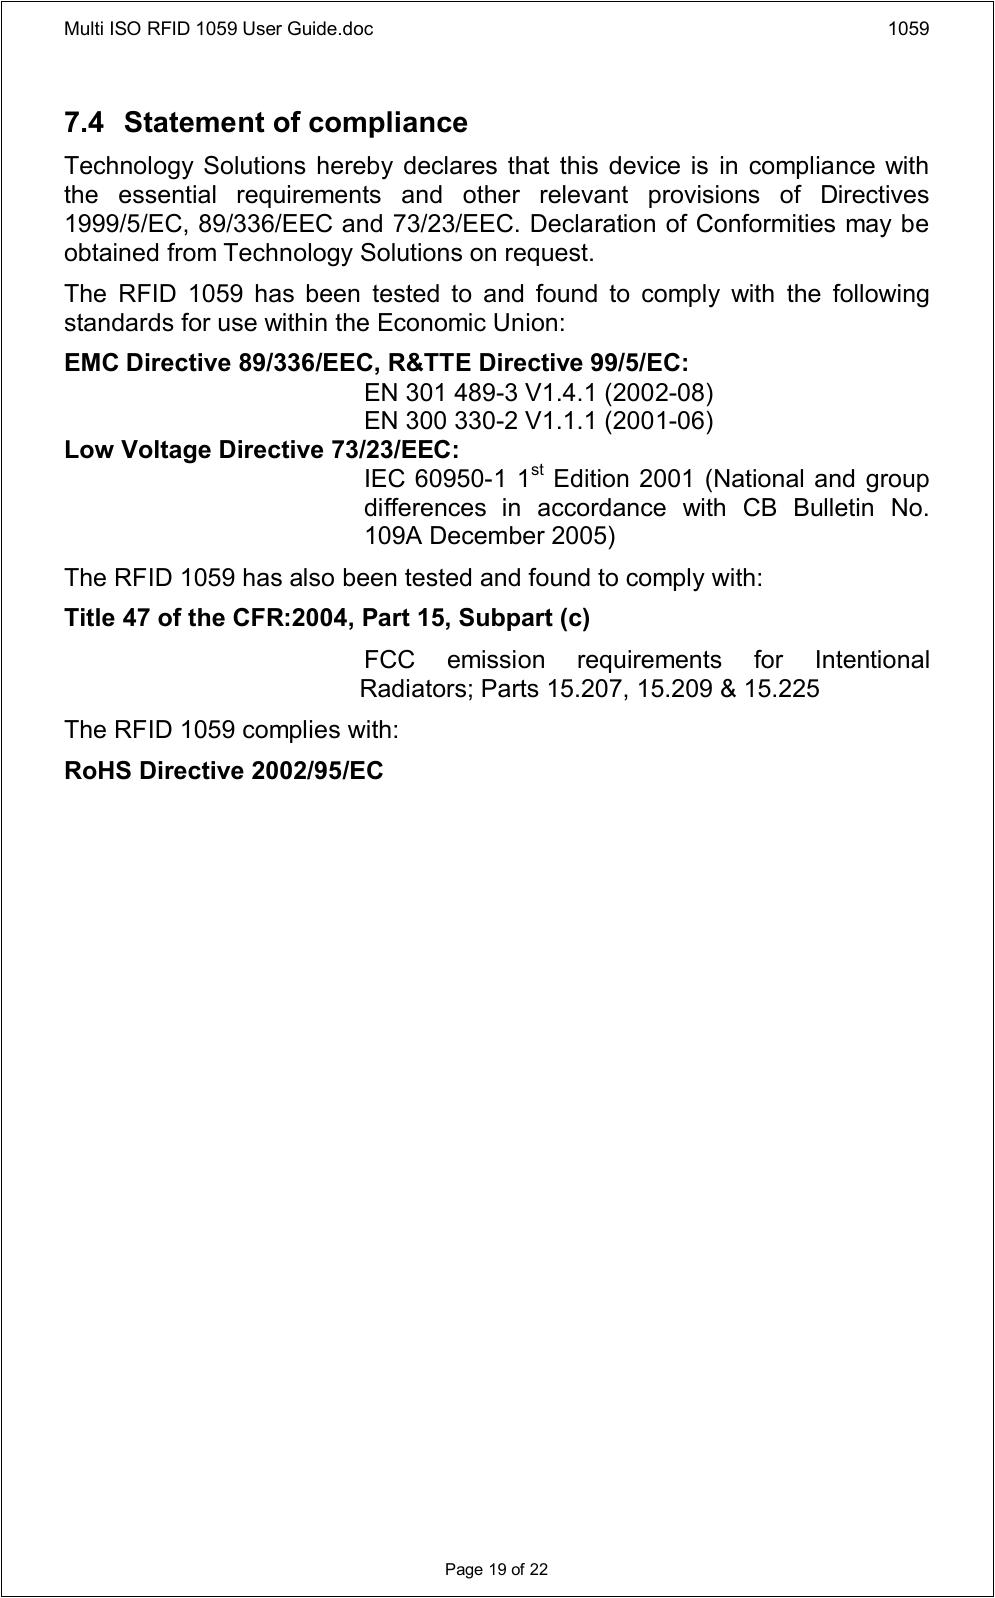 Multi ISO RFID 1059 User Guide.doc 1059Page 19 of 227.4 Statement of complianceTechnology Solutions hereby  declares that  this device is in  compliance with the  essential  requirements  and  other  relevant  provisions  of  Directives 1999/5/EC, 89/336/EEC and 73/23/EEC. Declaration of Conformities may be obtained from Technology Solutions on request.The  RFID  1059  has  been  tested  to  and  found  to  comply  with  the  following standards for use within the Economic Union:EMC Directive 89/336/EEC, R&amp;TTE Directive 99/5/EC:EN 301 489-3 V1.4.1 (2002-08)EN 300 330-2 V1.1.1 (2001-06)Low Voltage Directive 73/23/EEC:IEC 60950-1 1st Edition 2001 (National and group differences  in  accordance  with  CB  Bulletin  No. 109A December 2005)The RFID 1059 has also been tested and found to comply with:Title 47 of the CFR:2004, Part 15, Subpart (c)FCC  emission  requirements  for  Intentional Radiators; Parts 15.207, 15.209 &amp; 15.225The RFID 1059 complies with:RoHS Directive 2002/95/EC